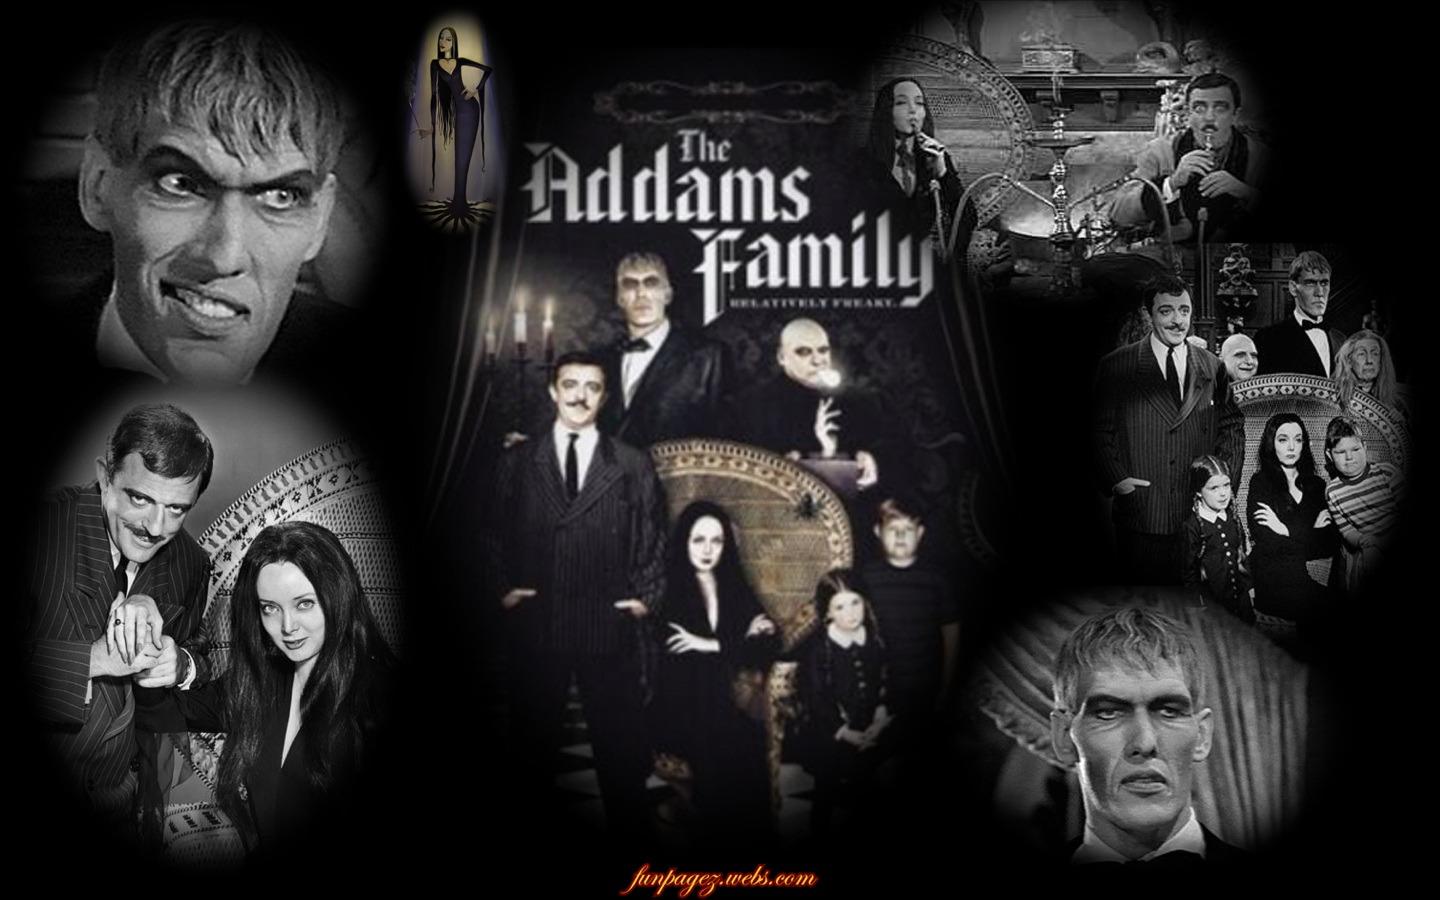 Addams Family 60s Wallpaper (no spiders) by Mardi's Funpagez